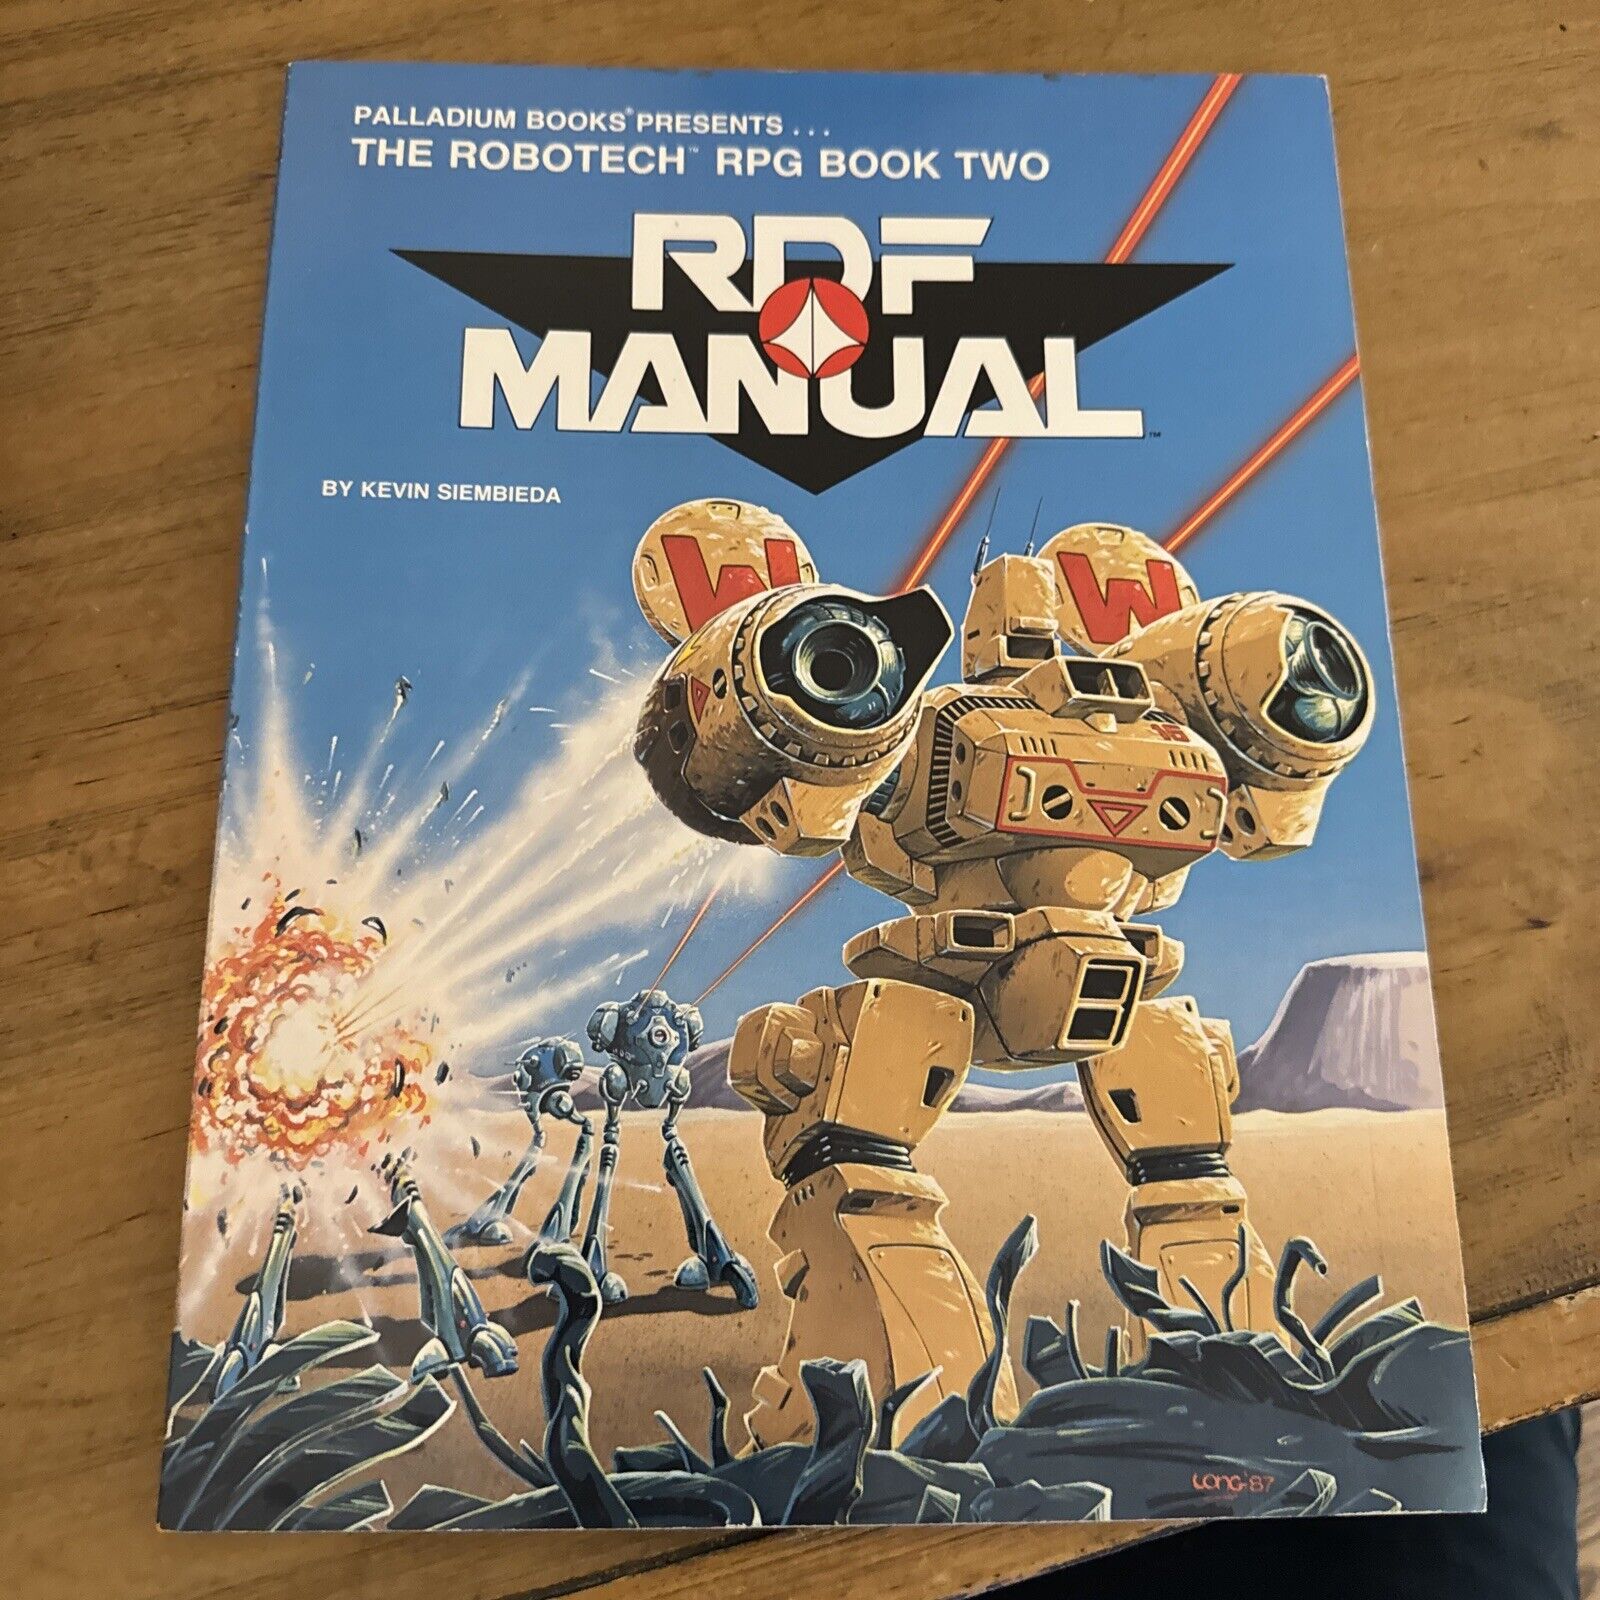 Vtg 1987 Robotech RPG Book Two, RDF Manual by Kevin Siembieda, Book 2